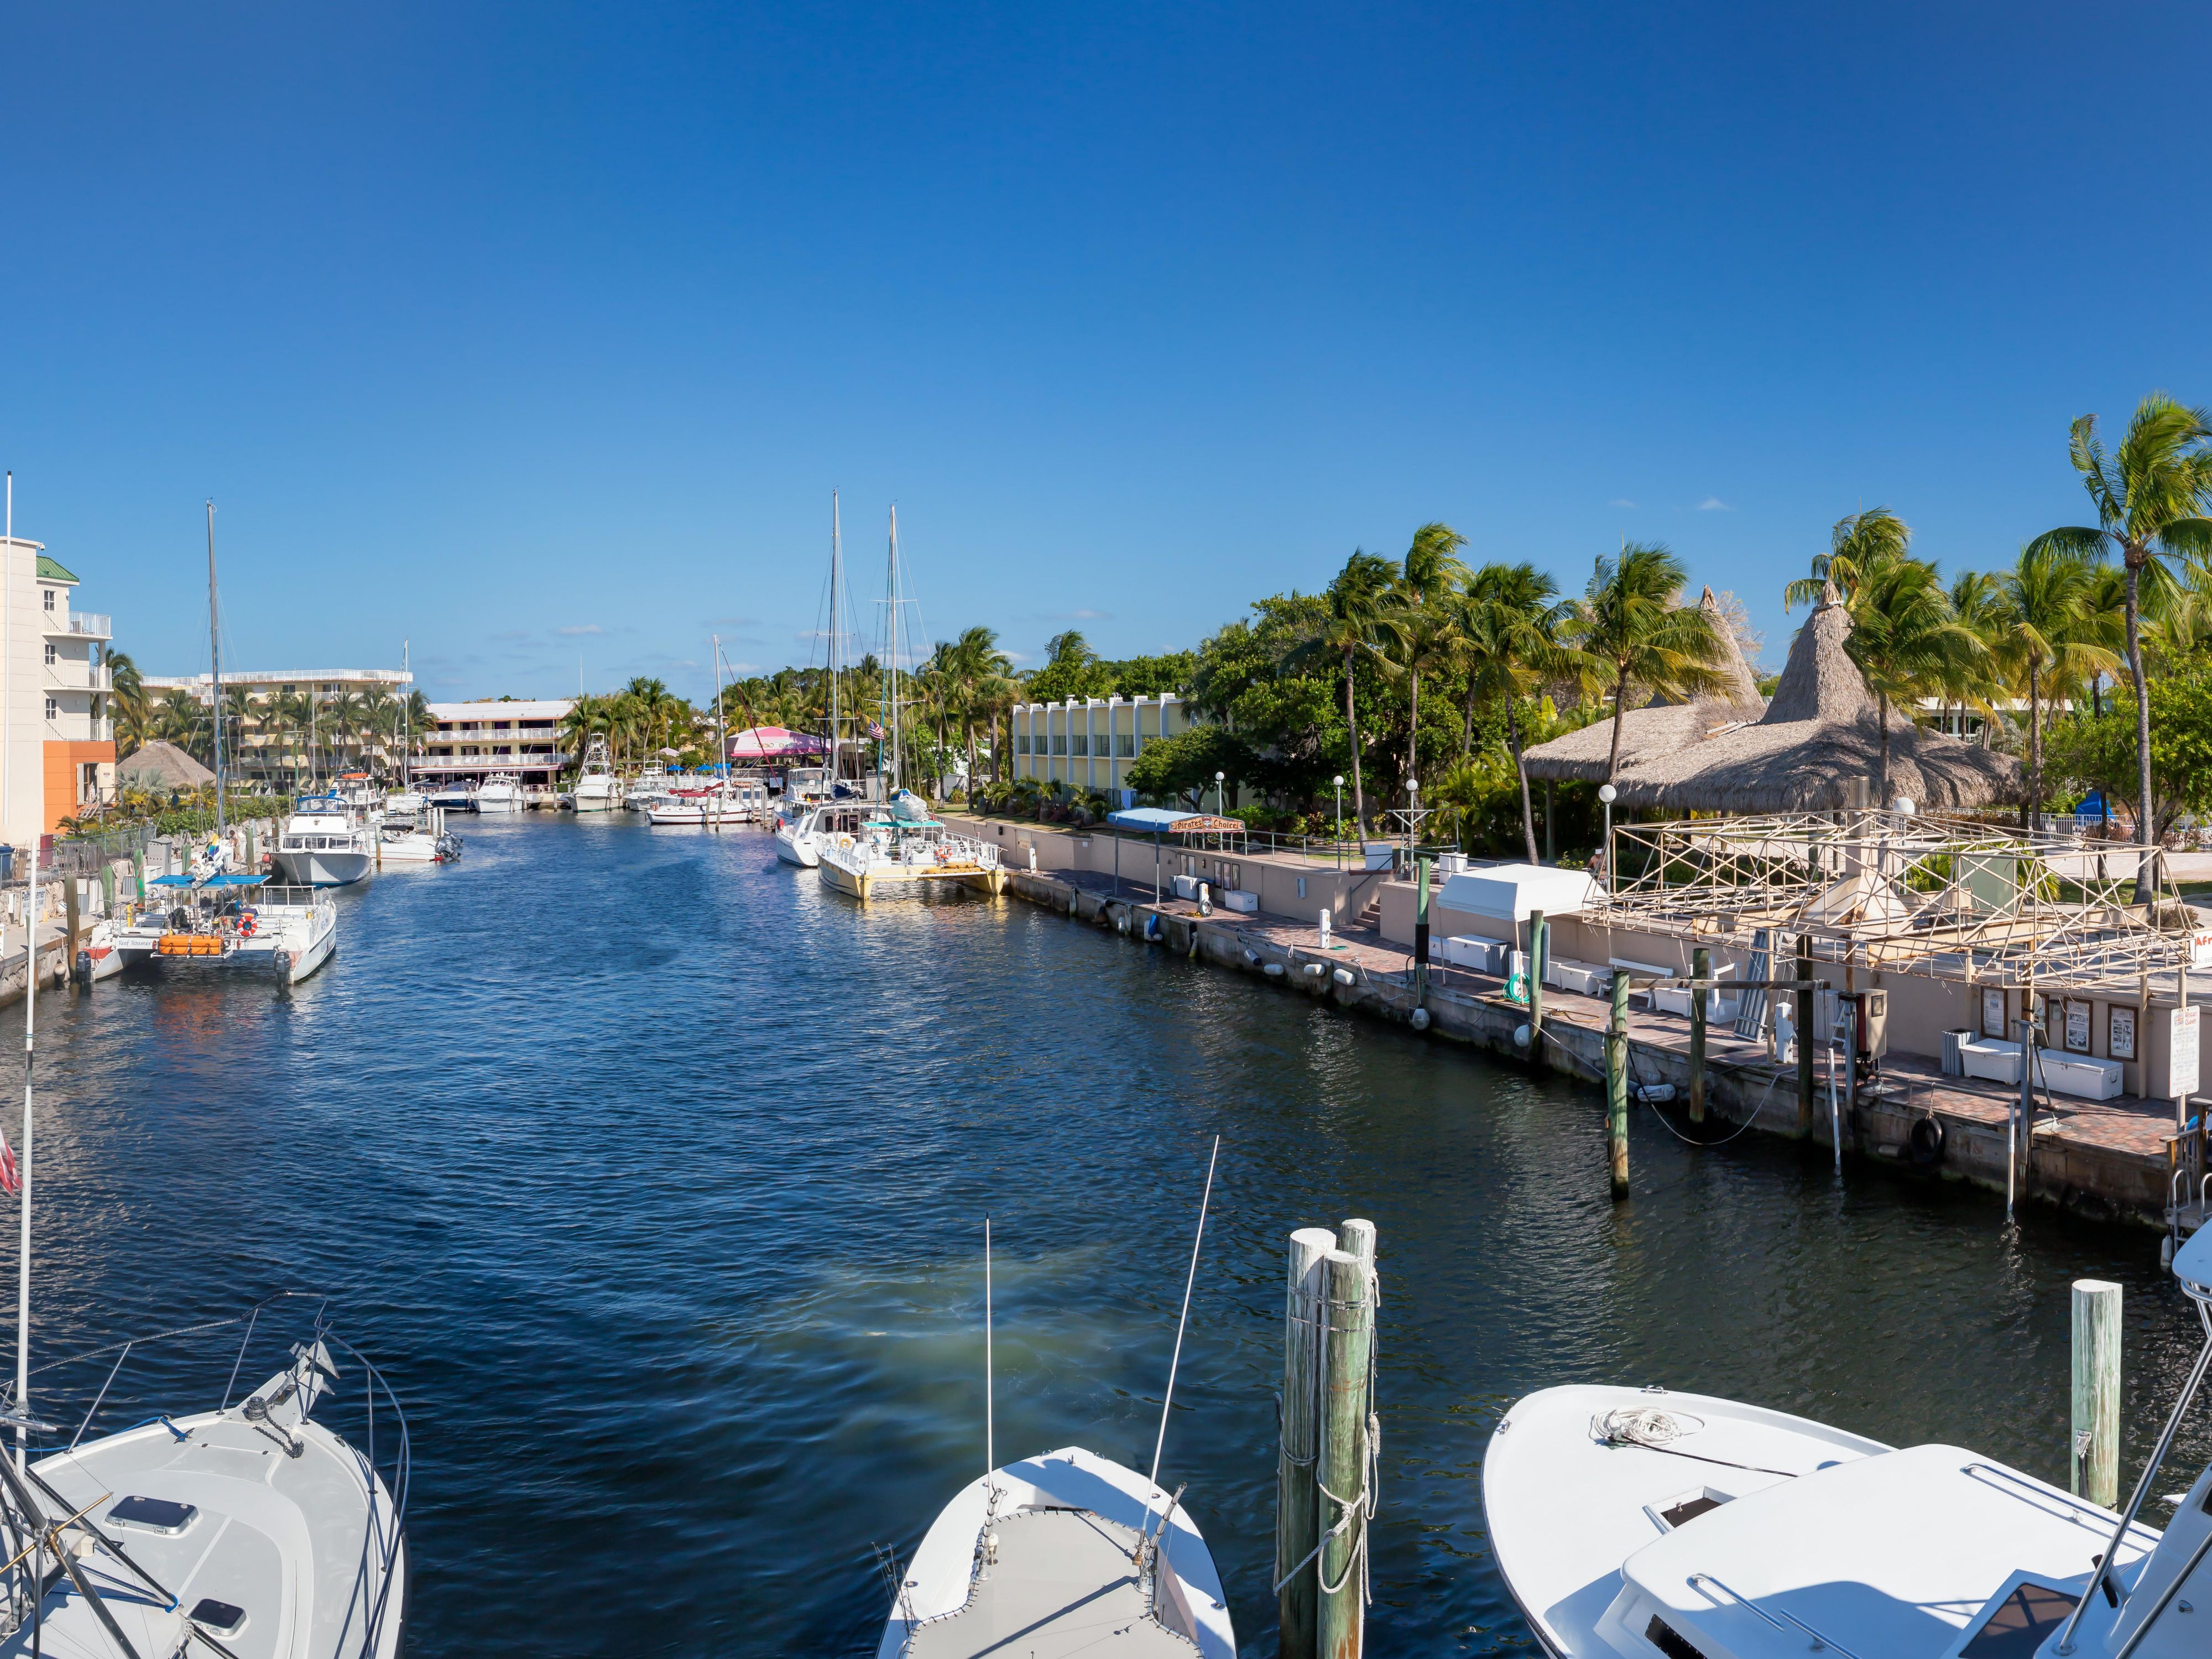 Located on Key Largo Marina which hosts several snorkel and dive boats, and the Key Largo Princess glass bottom boat. Also home to the African Queen boat from the famed 1951 movie!